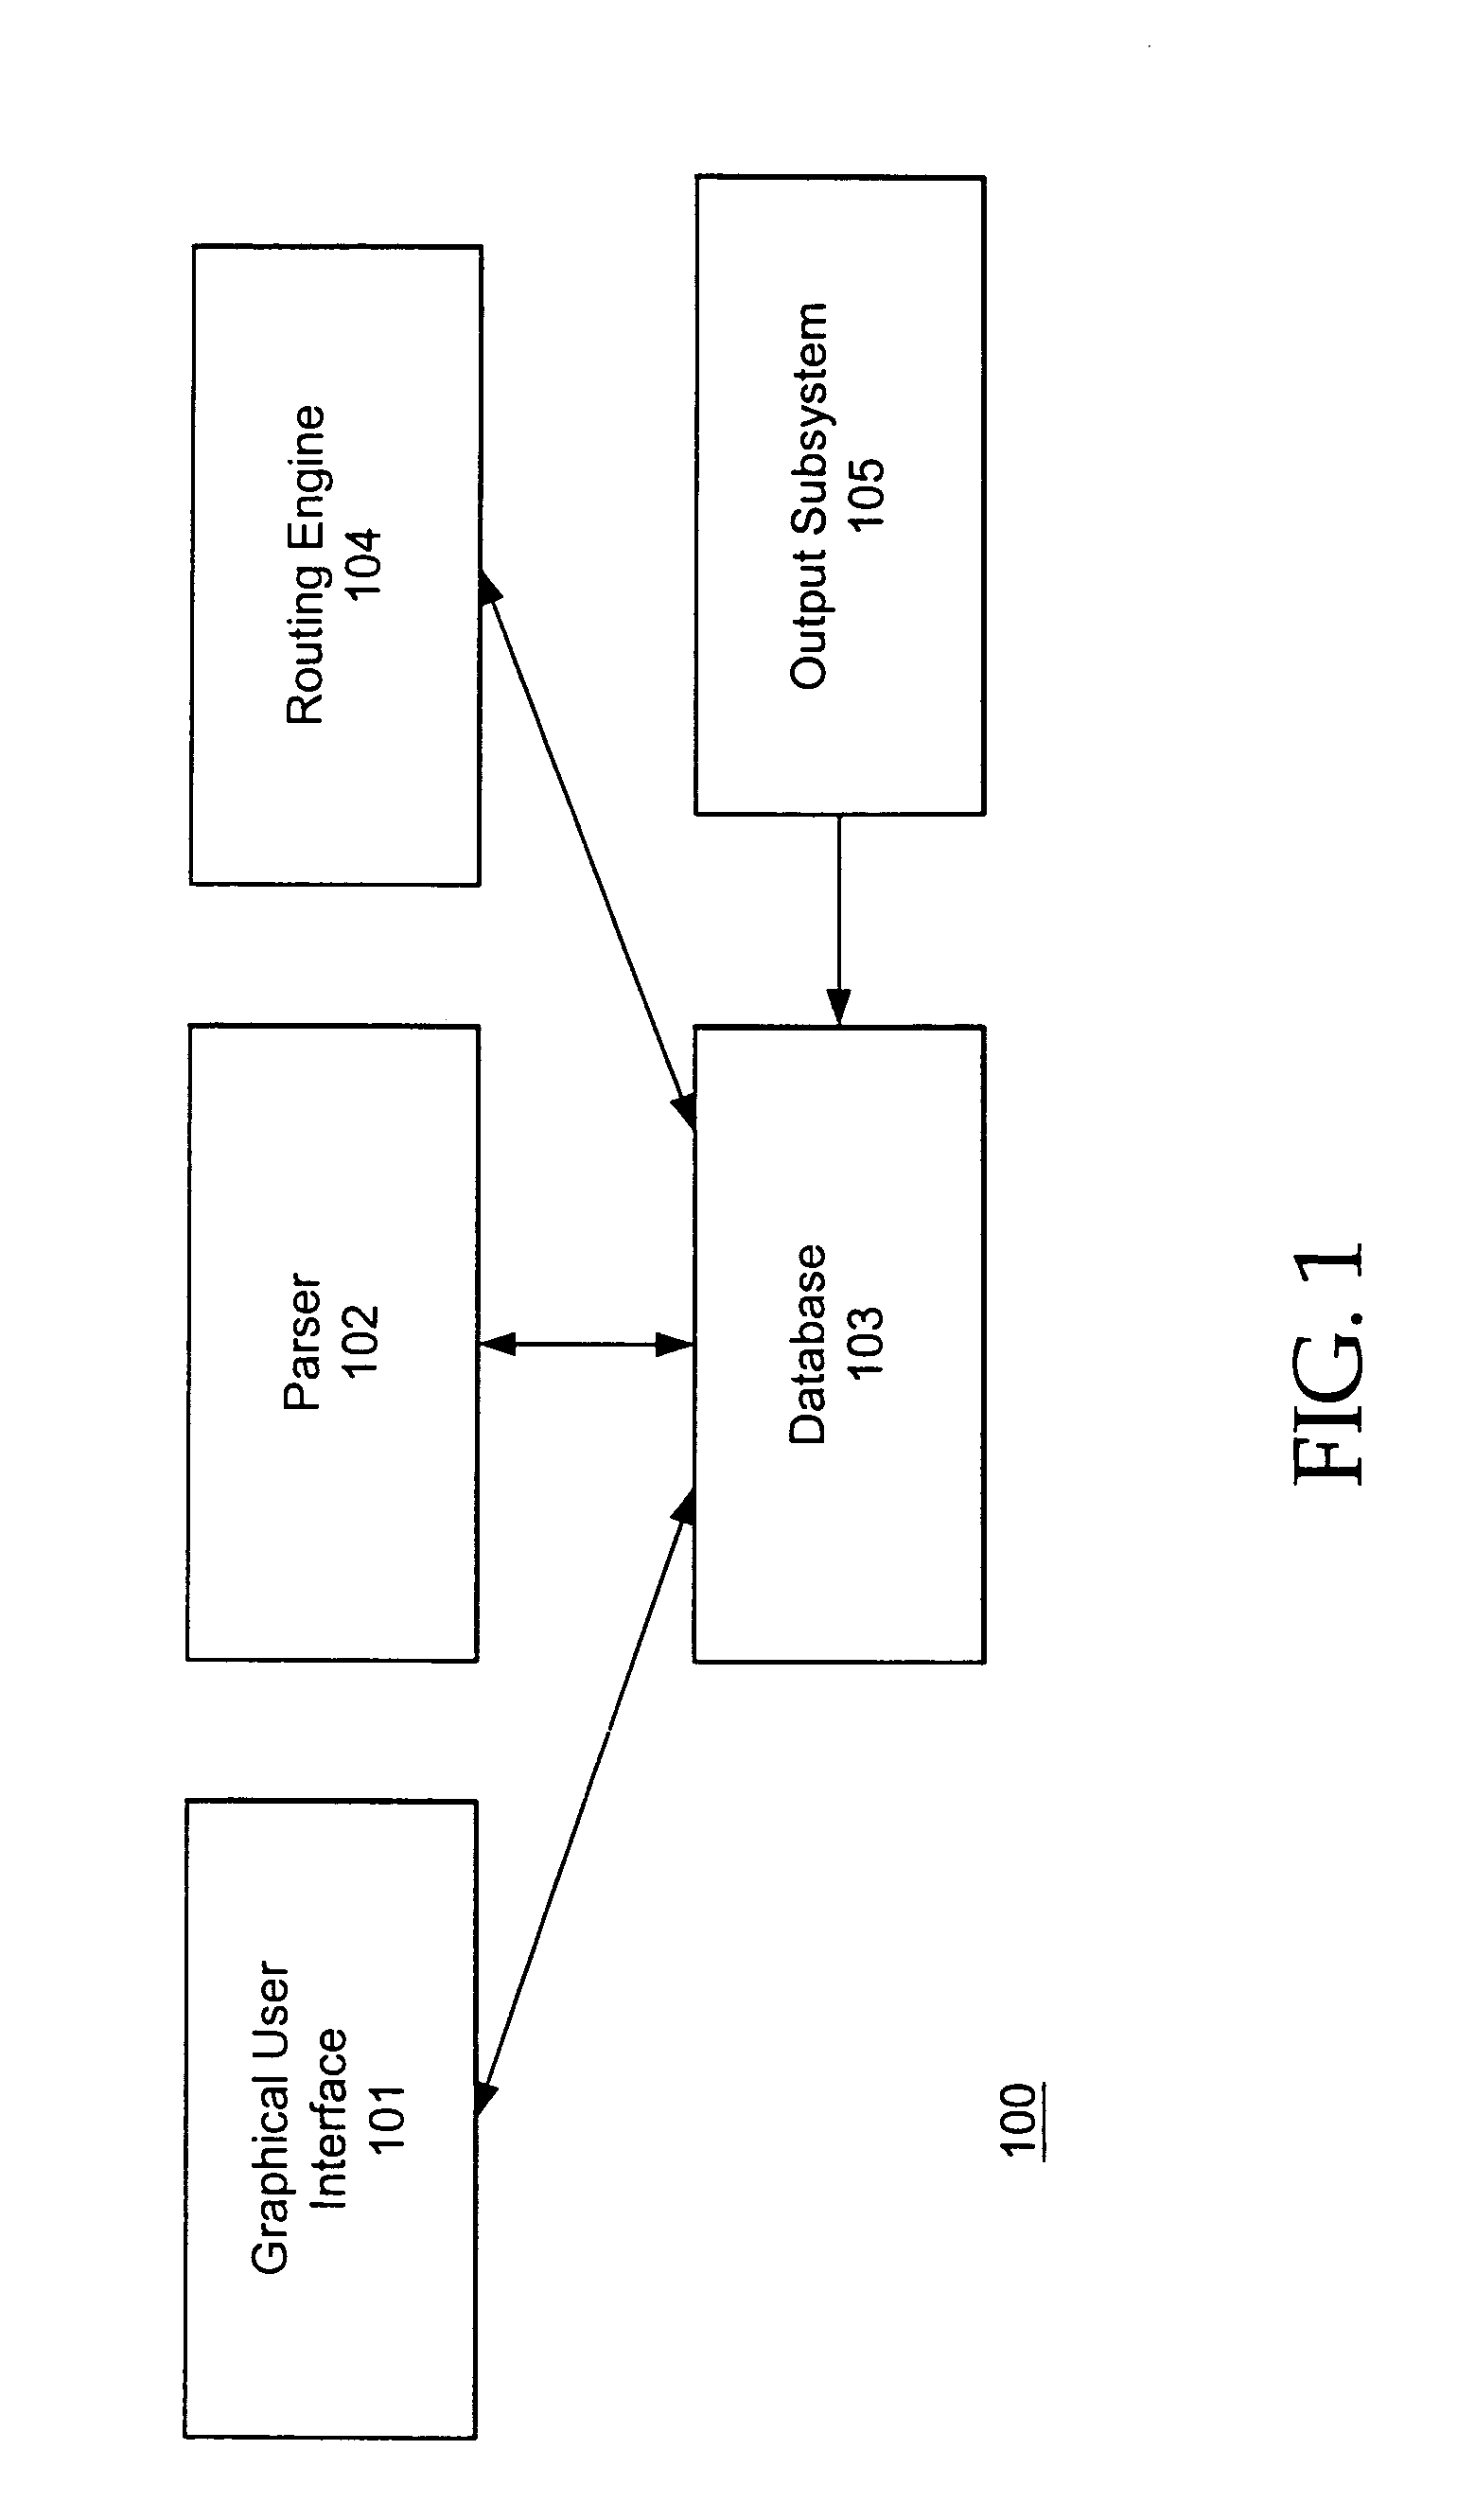 Method and apparatus for scalable interconnect solution